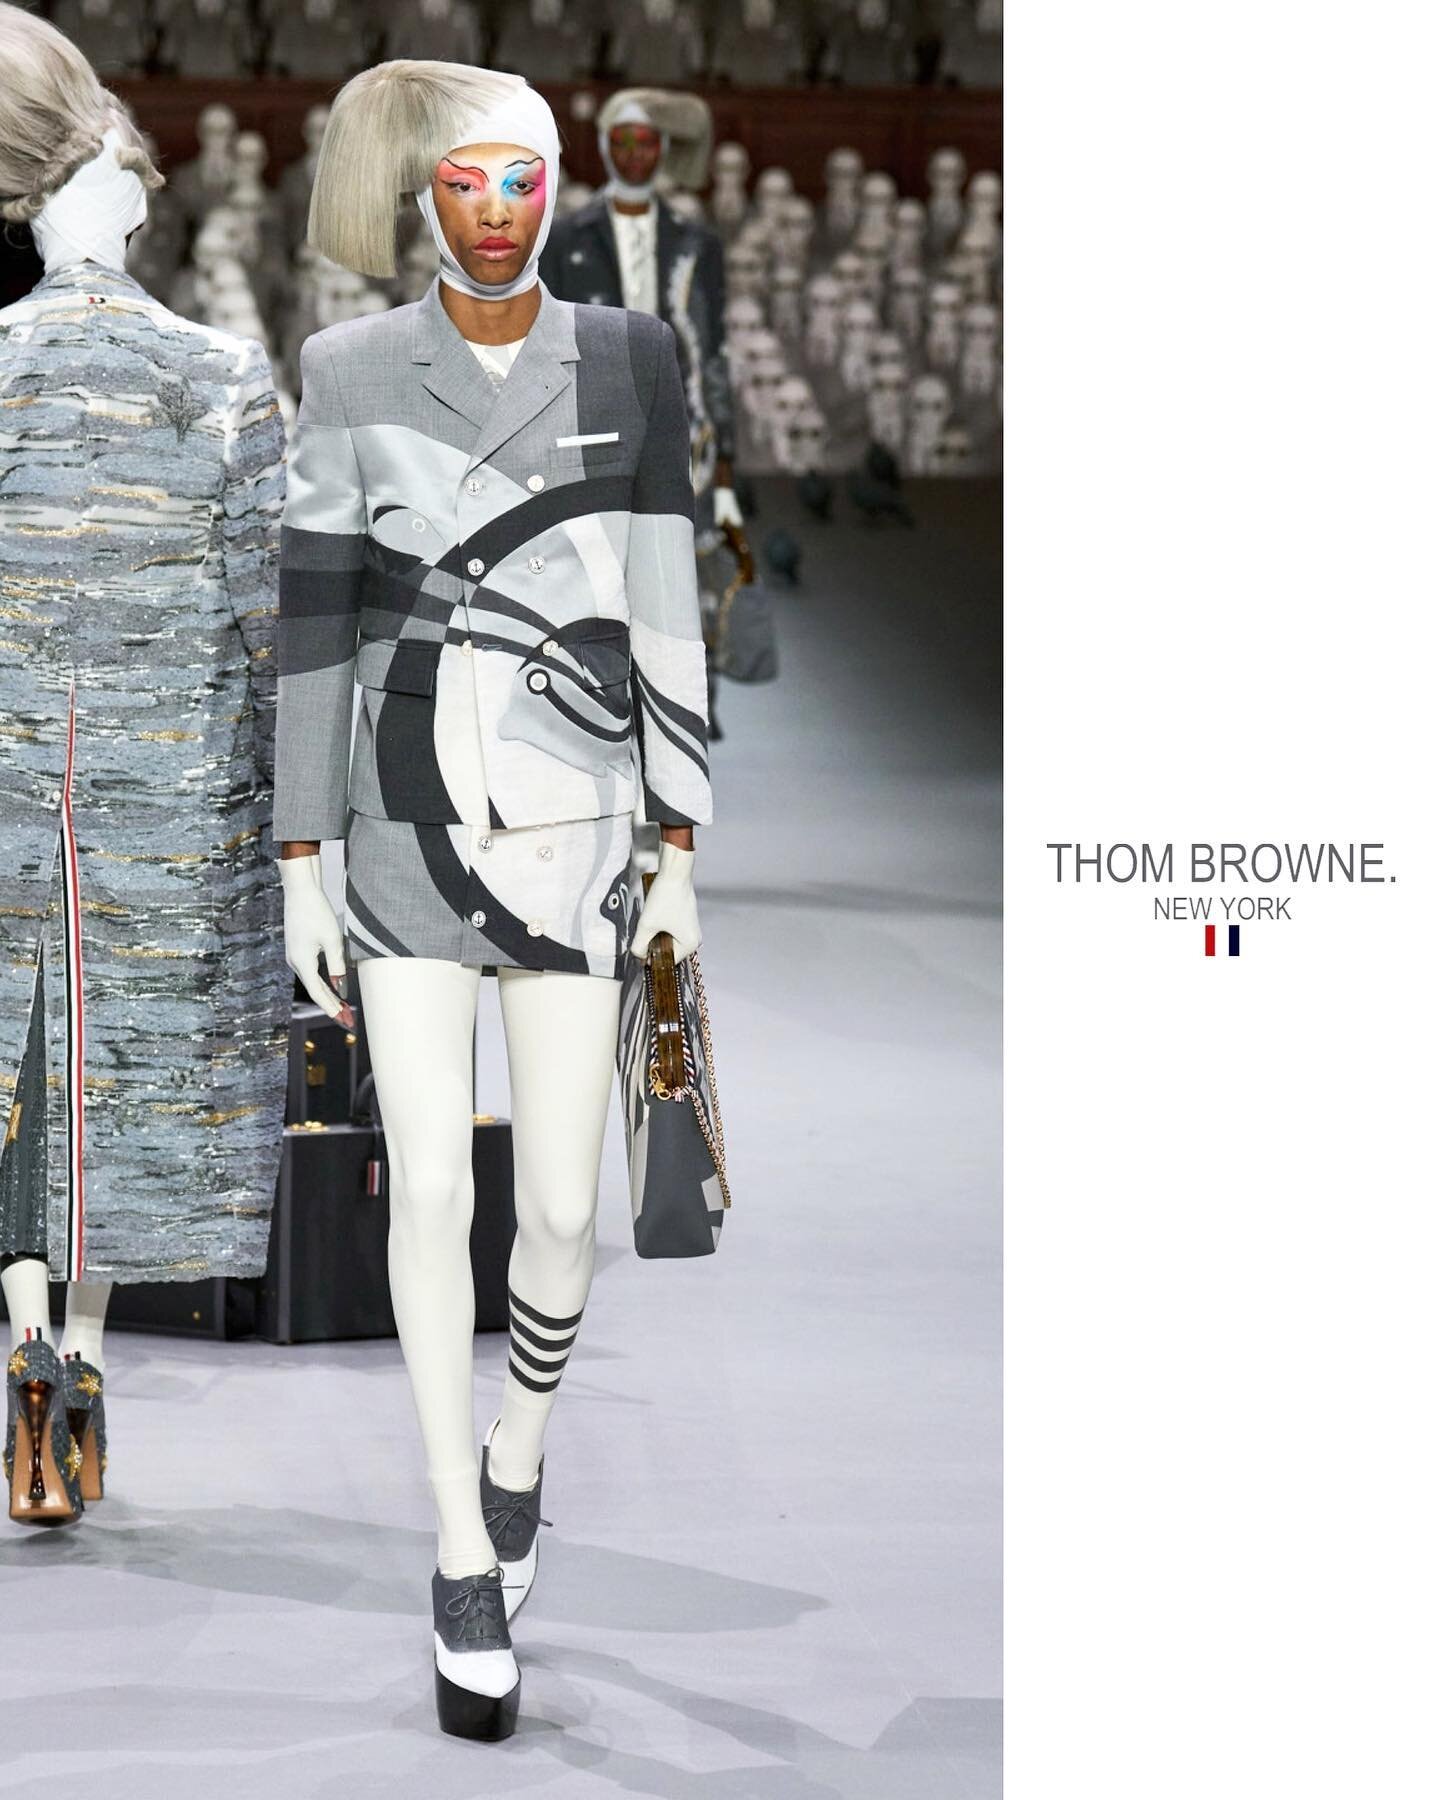 𝐓𝐇𝐎𝐌 𝐁𝐑𝐎𝐖𝐍𝐄 💎🚶🏽𝑱𝒆𝒄𝒂𝒓𝒅𝒊 𝑺𝒚𝒌𝒆𝒔 (@jecardisykes) on the #runway in #Paris for @thombrowne 𝐅𝐚𝐥𝐥 𝟐𝟎𝟐𝟑 𝐇𝐚𝐮𝐭𝐞 𝐂𝐨𝐮𝐭𝐮𝐫𝐞 𝐂𝐨𝐥𝐥𝐞𝐜𝐭𝐢𝐨𝐧 🙌👏⭐️
⠀
💆🏽&zwj;♂️ @eugenesouleiman 
💄 @isamayaffrench 
✍️ @adamhindlec